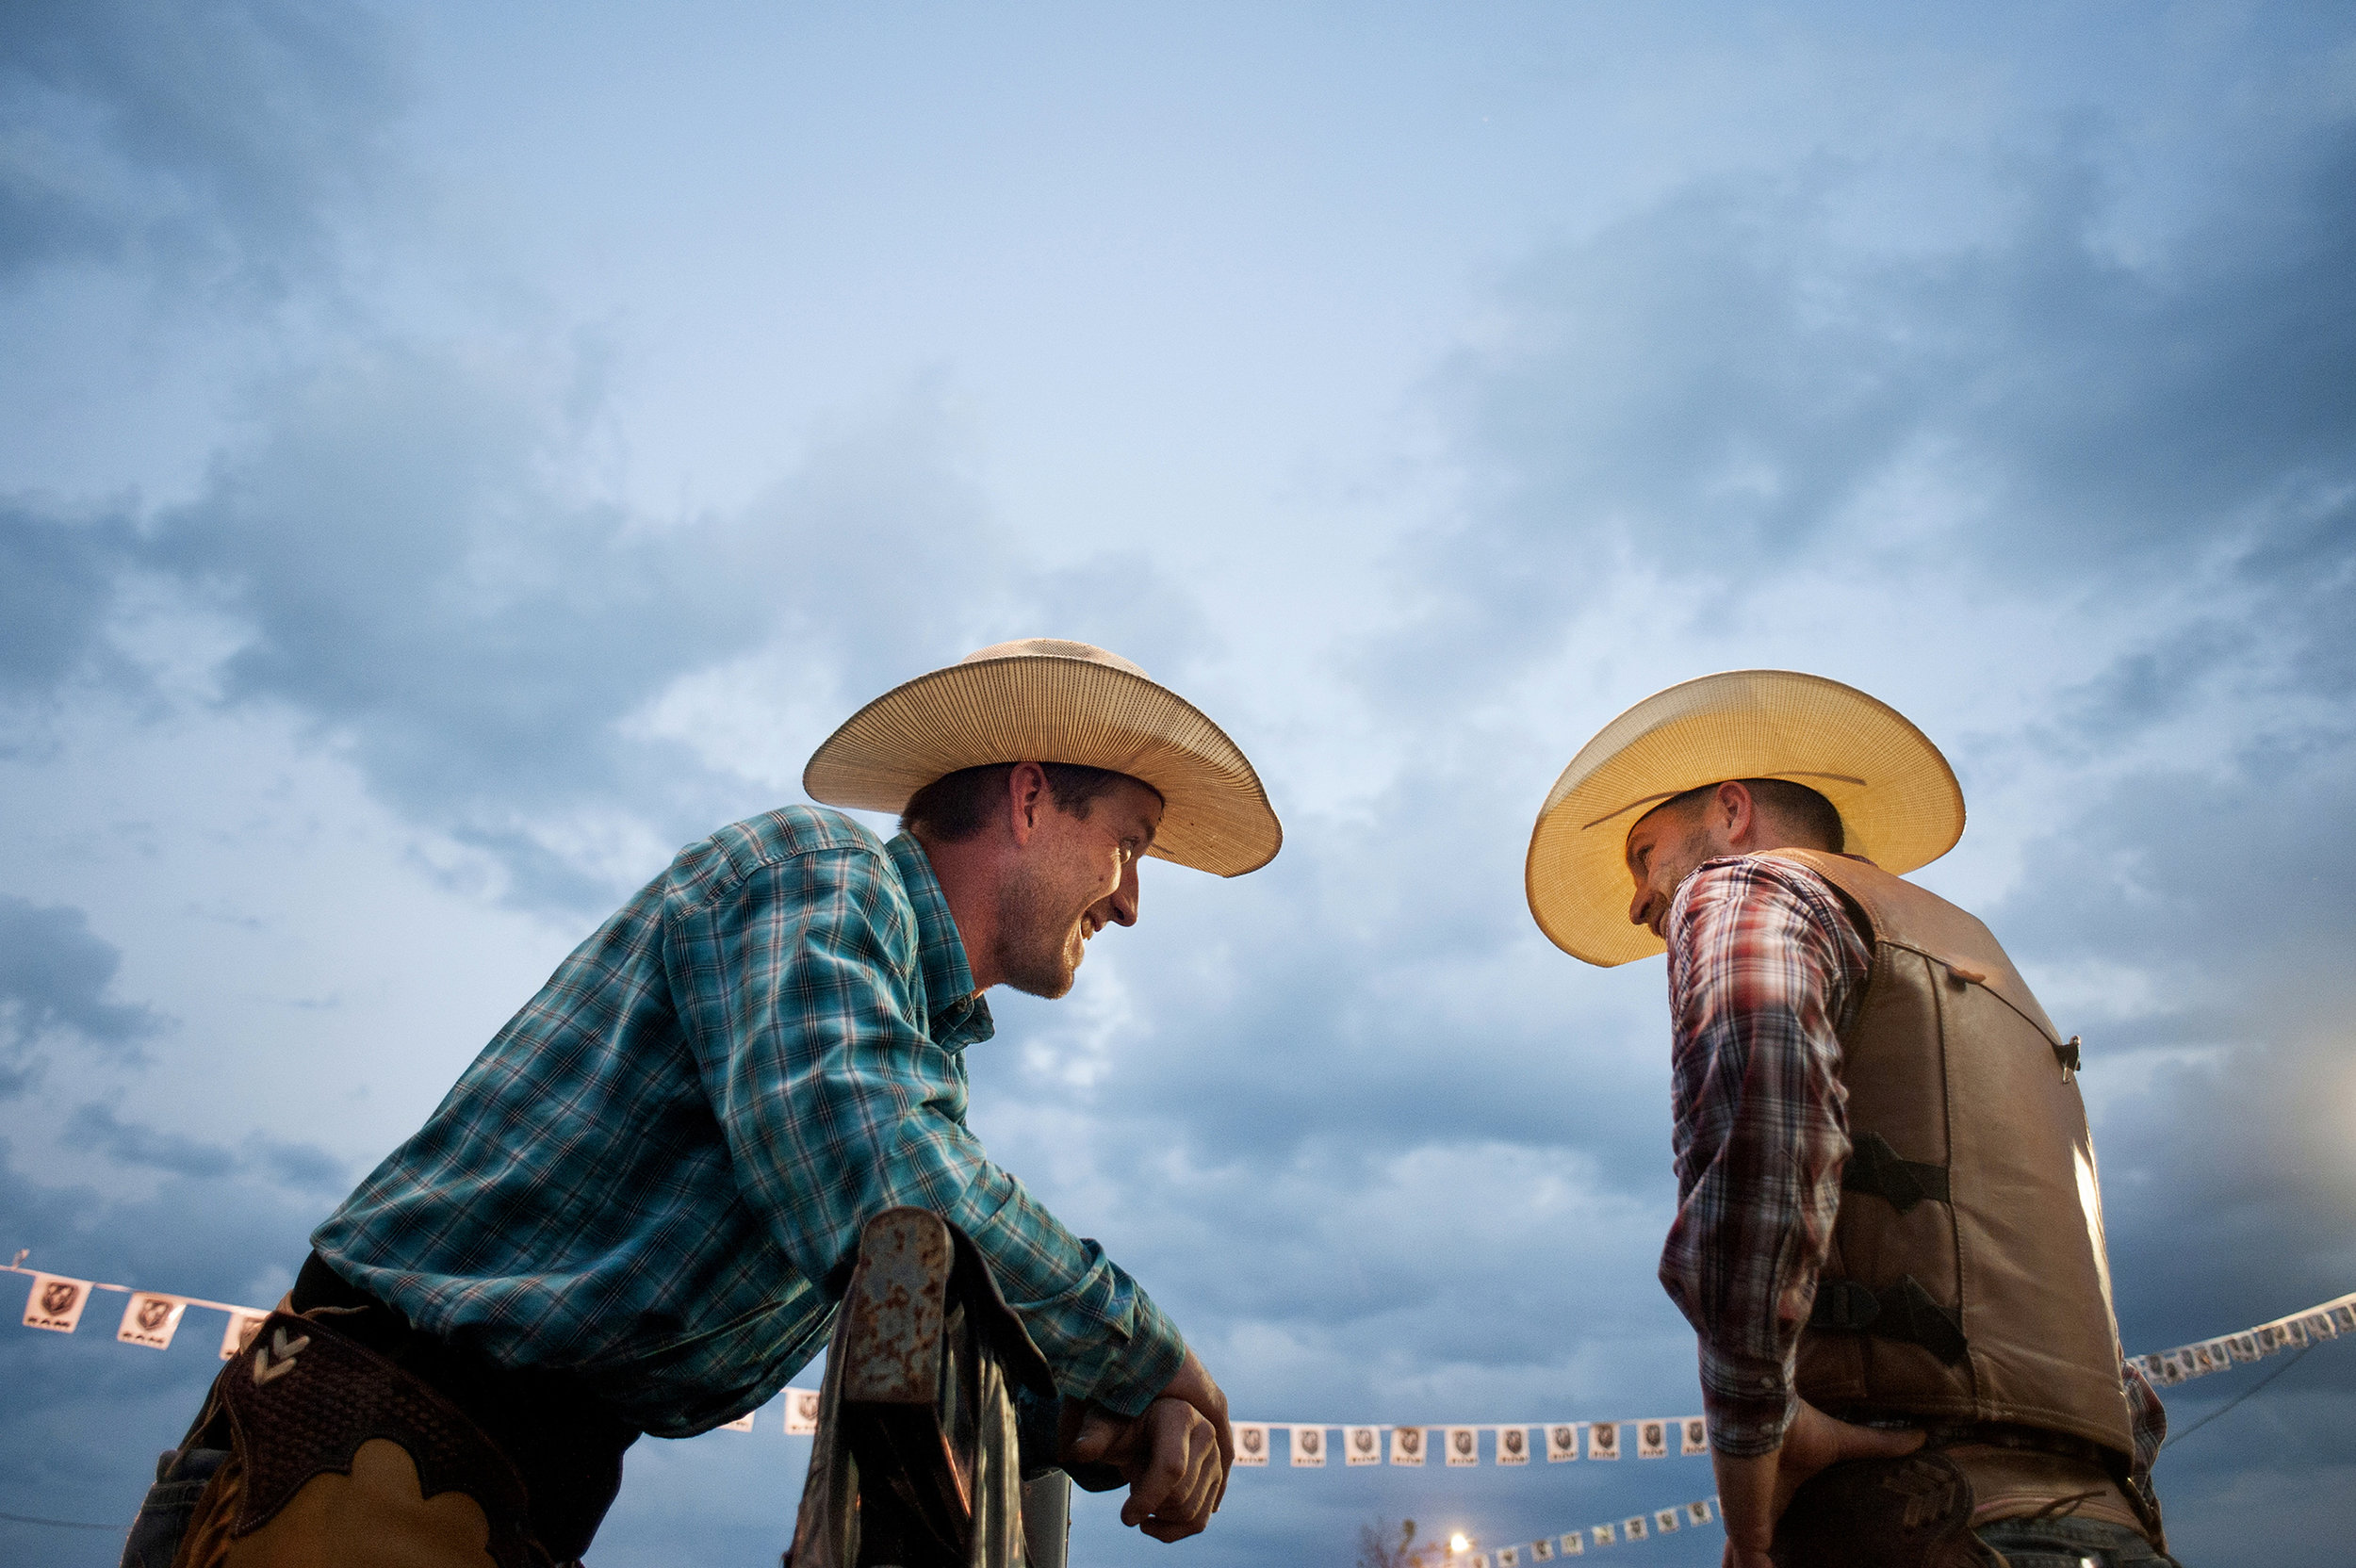  Kirk Nelson, of Branson, Mo., and Keith Brauer, of Belleville, Ill., speak before the start of their competitions. “For me, it’s just keeping the American West alive and letting people know that cowboys are still out there,” Brauer said. “It’s a way